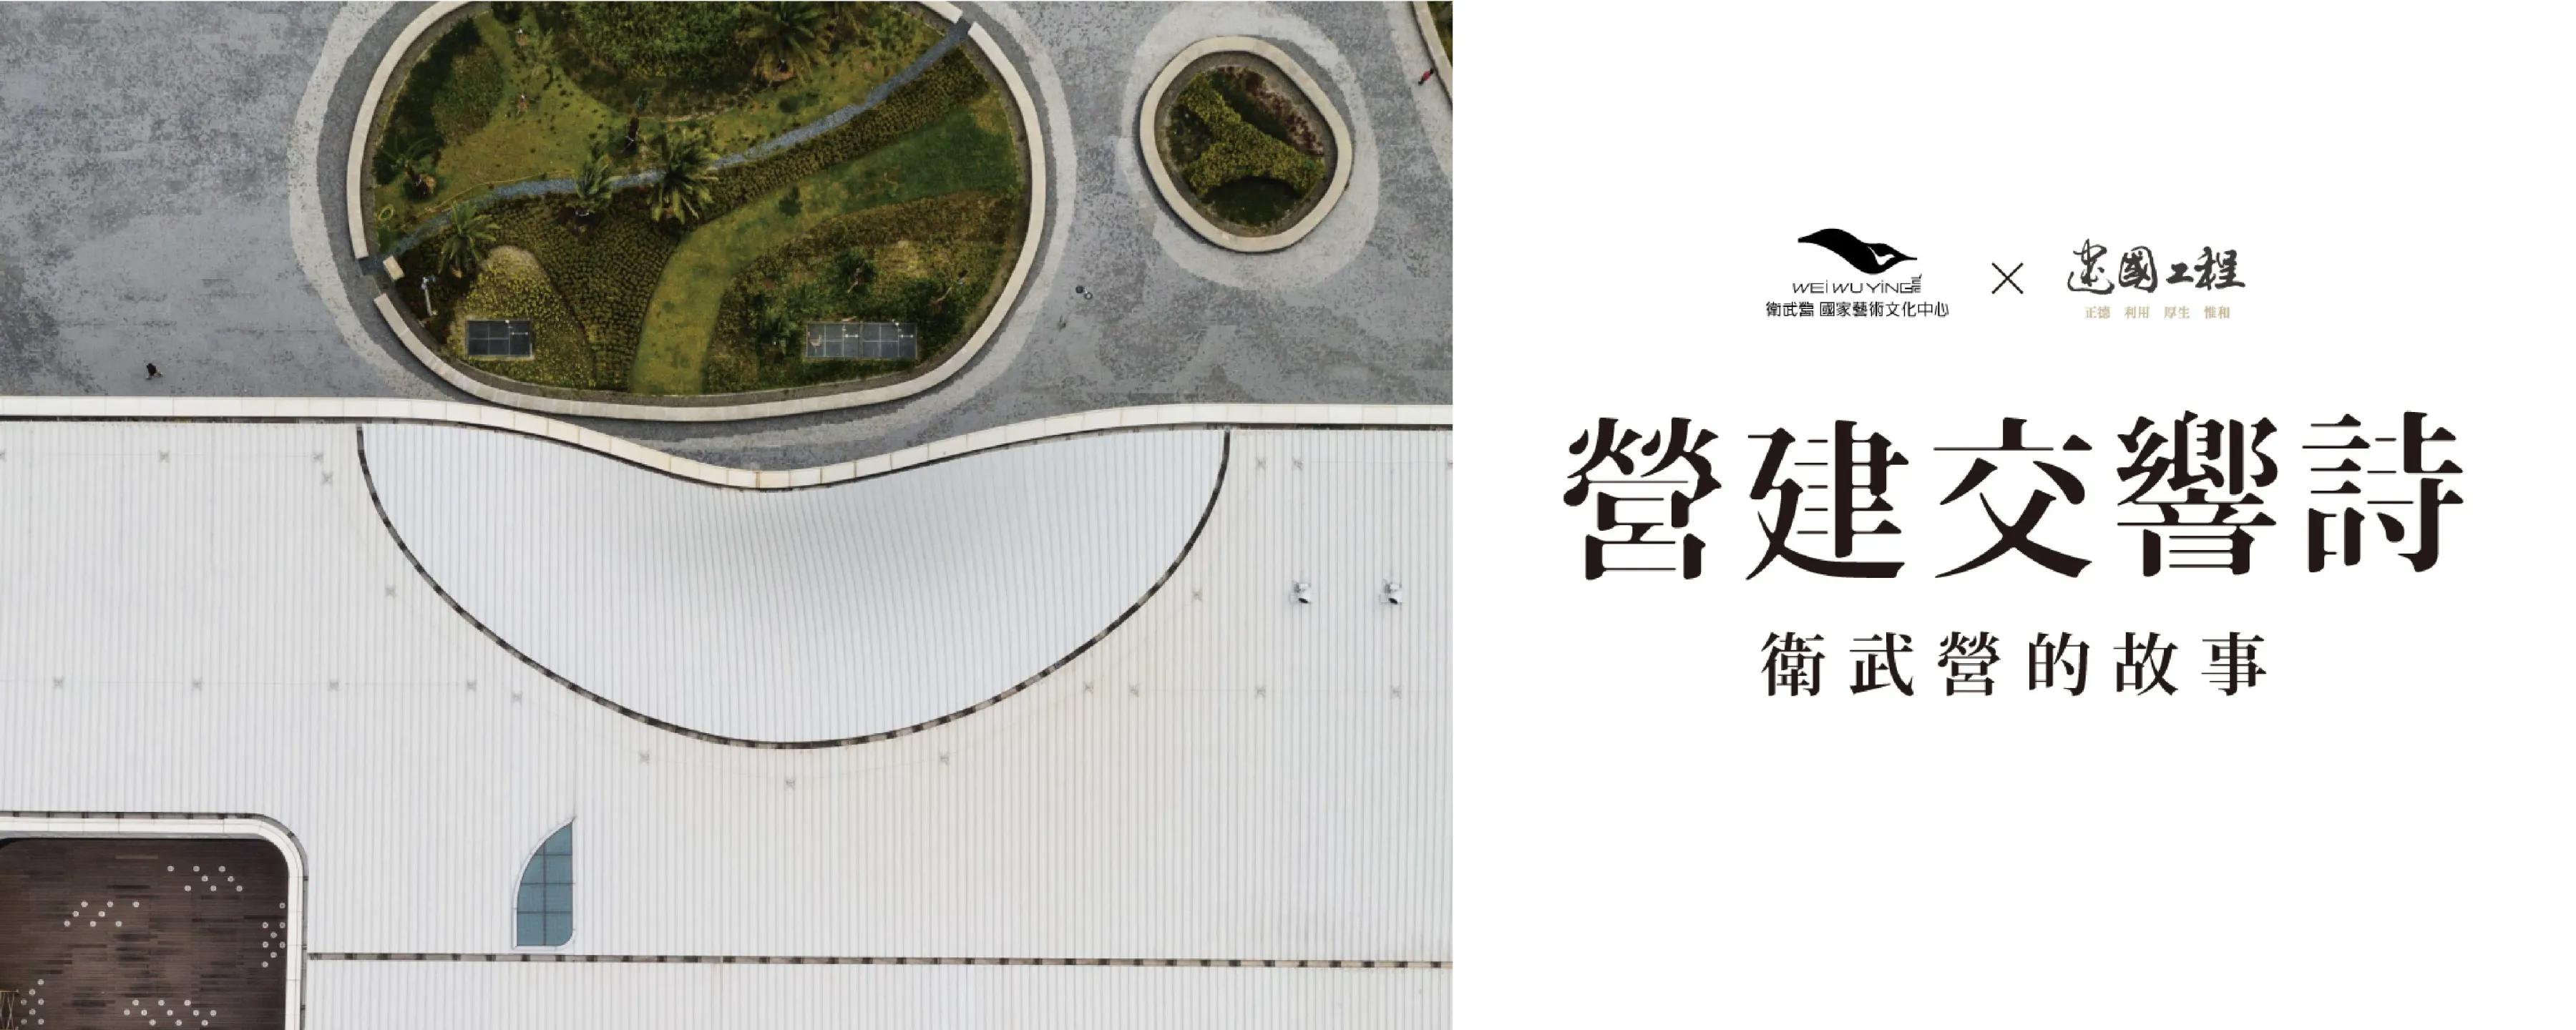 The Symphonic Poem of Weiwuying Architecture: An Architectural Art Forum